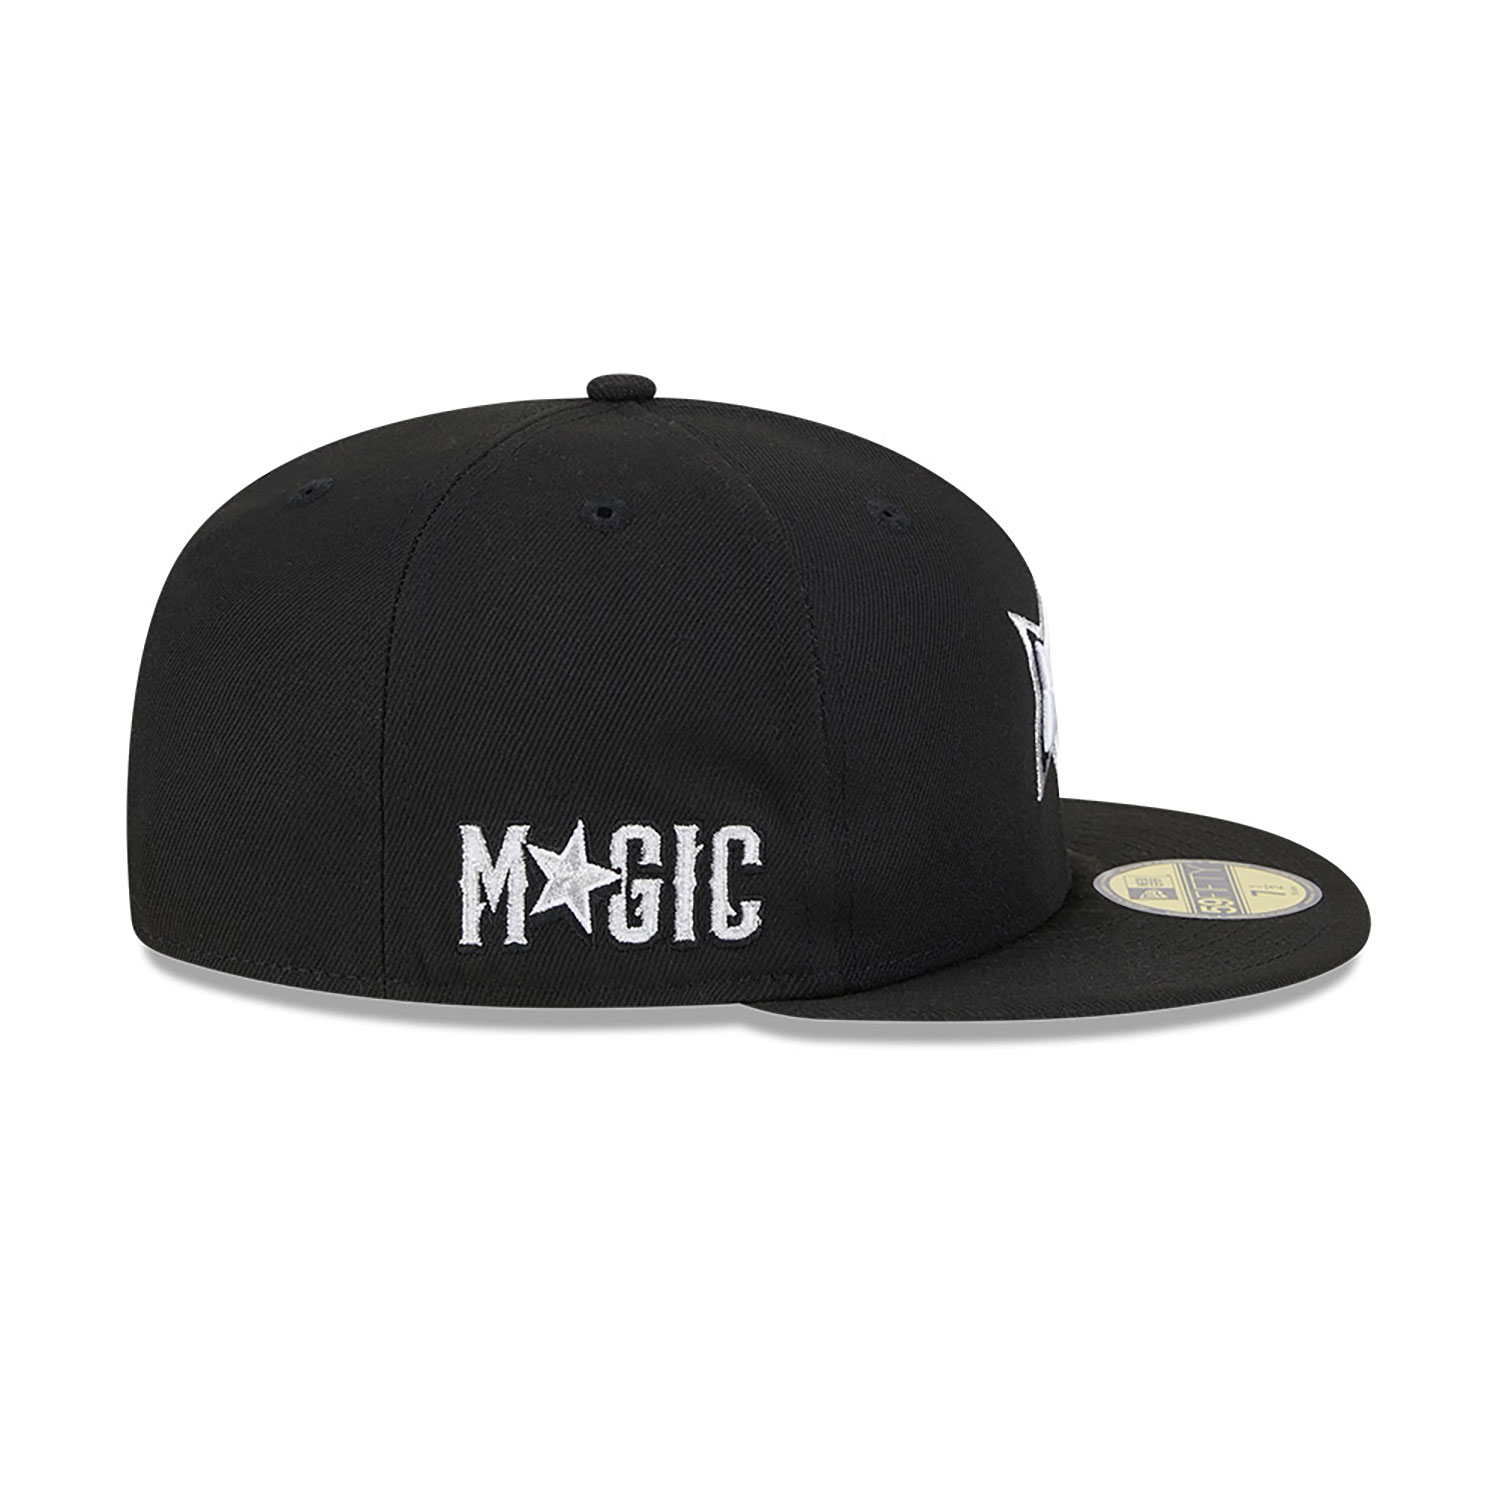 Orlando Magic NBA City Edition Black 59FIFTY Fitted Cap